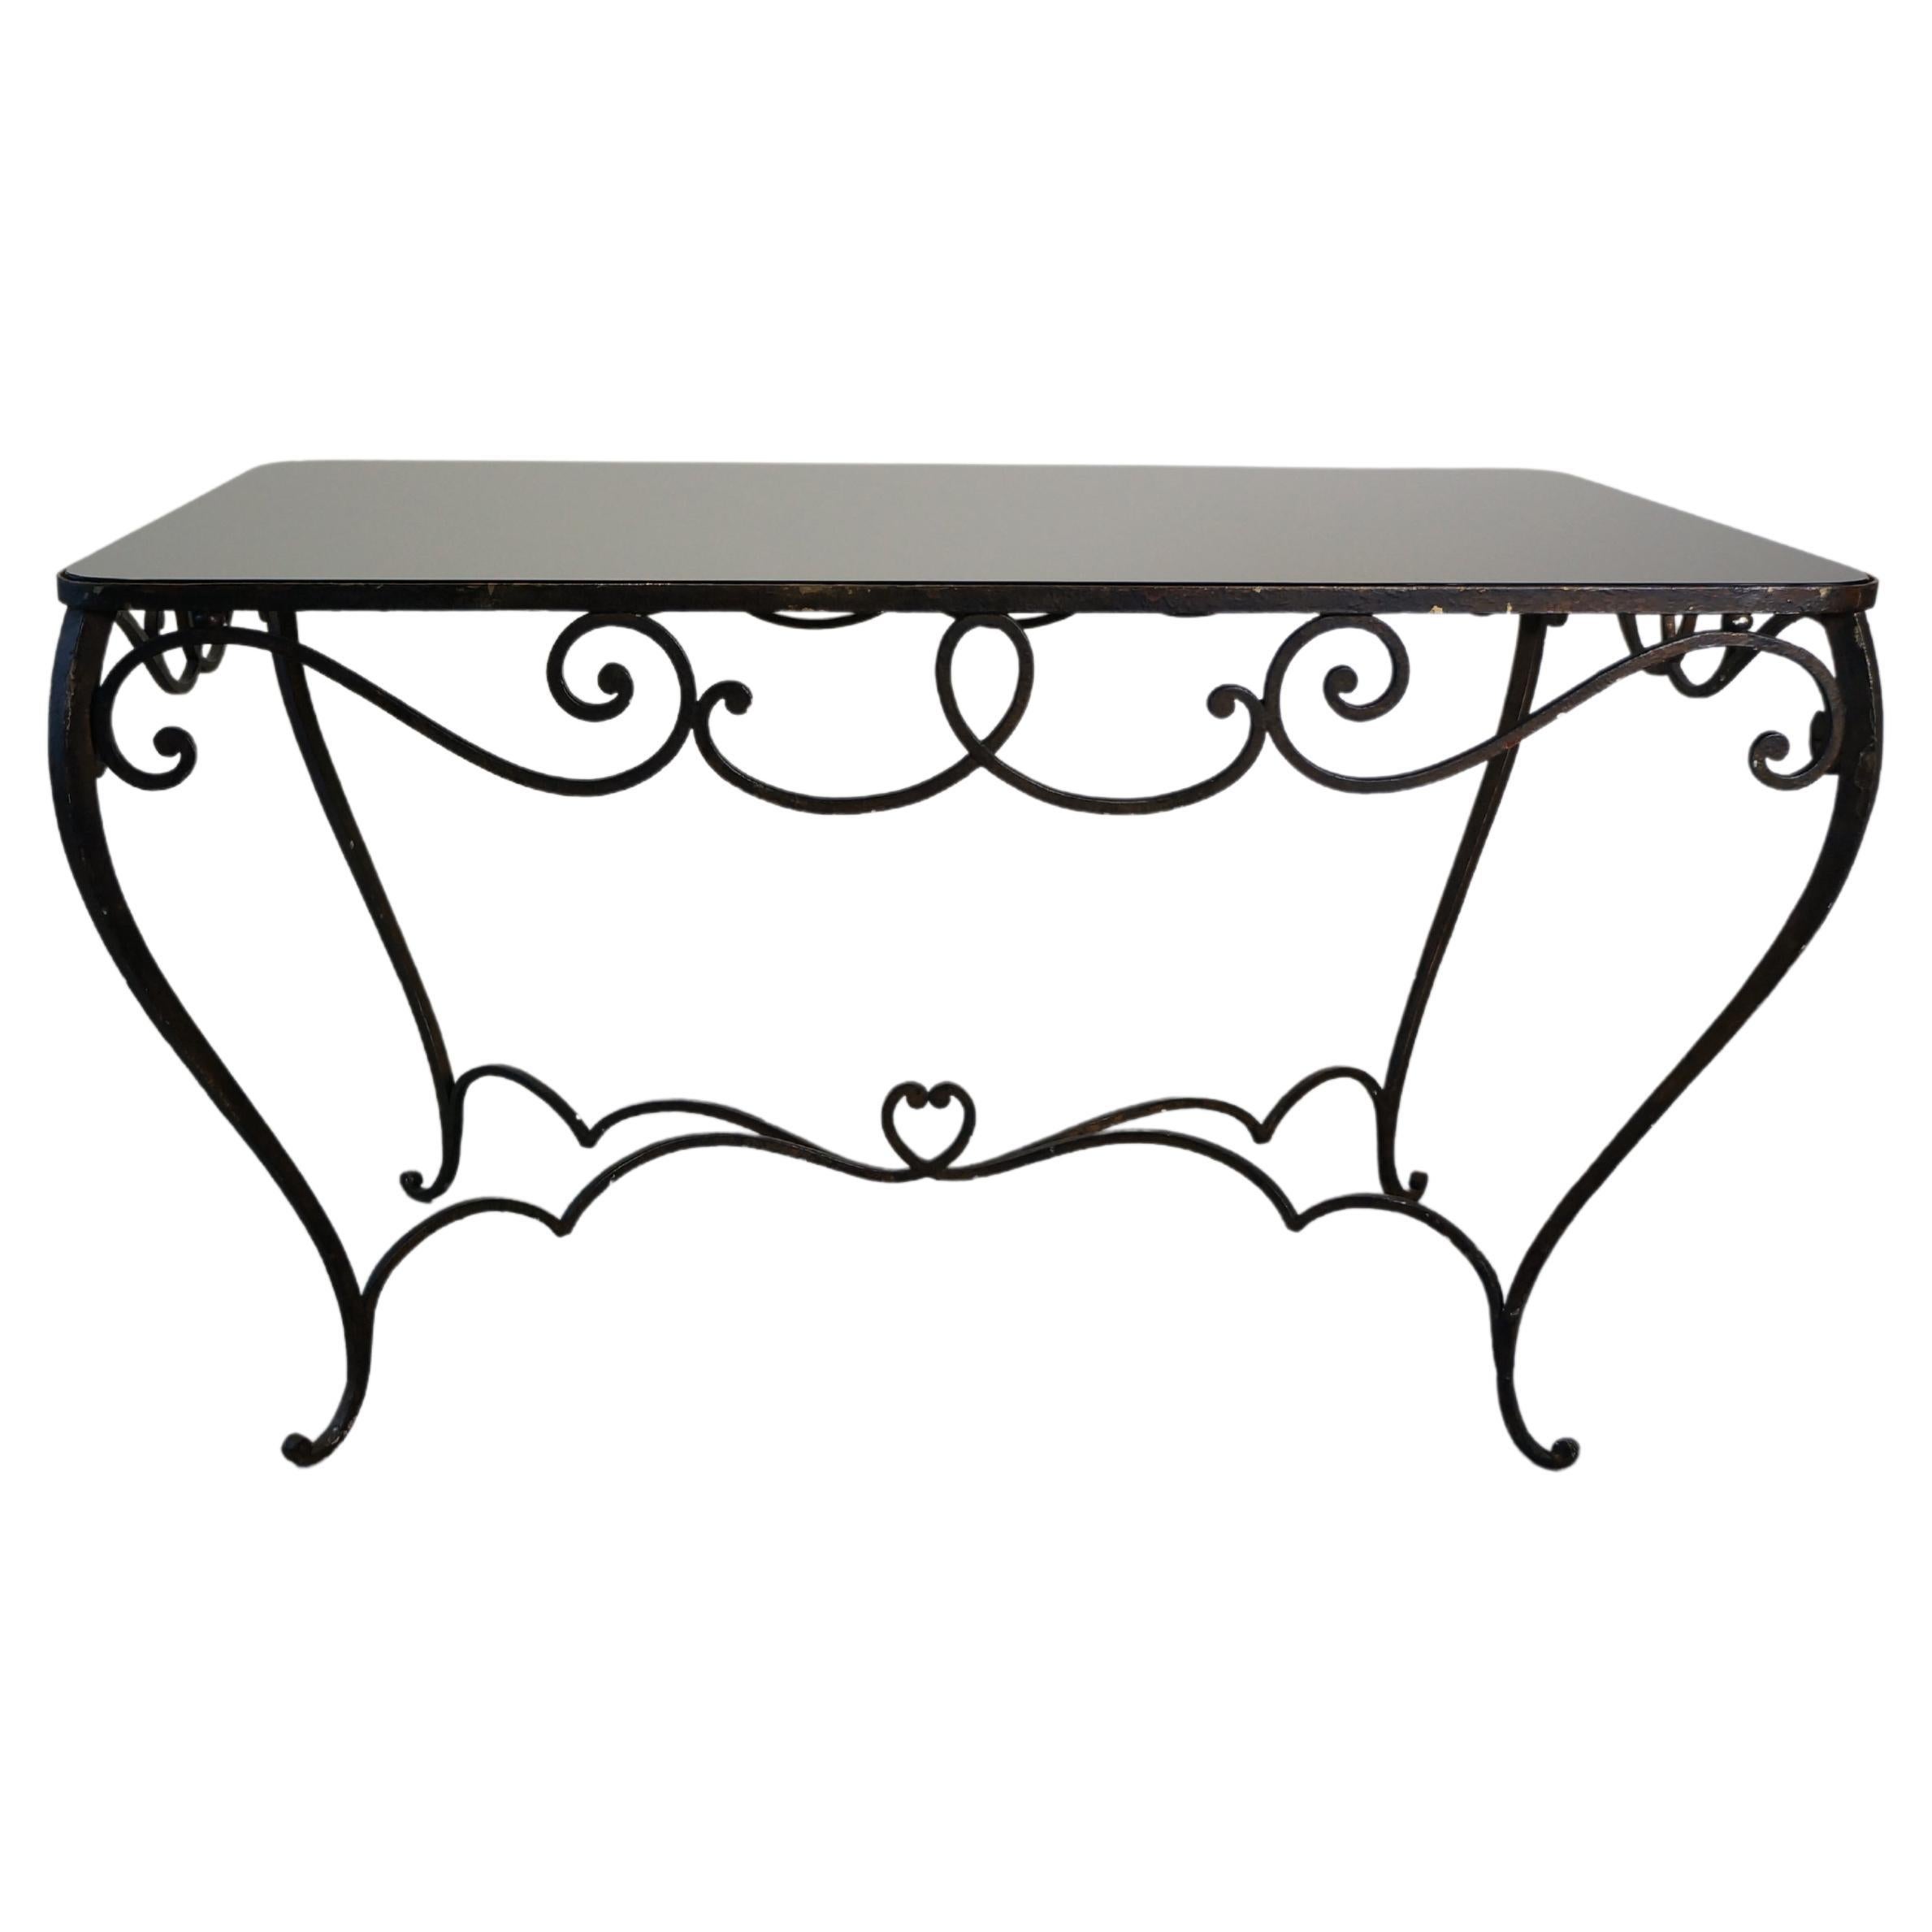 French Art Deco Wrought Iron Dining Table with Black Colored Glass, 1930s For Sale